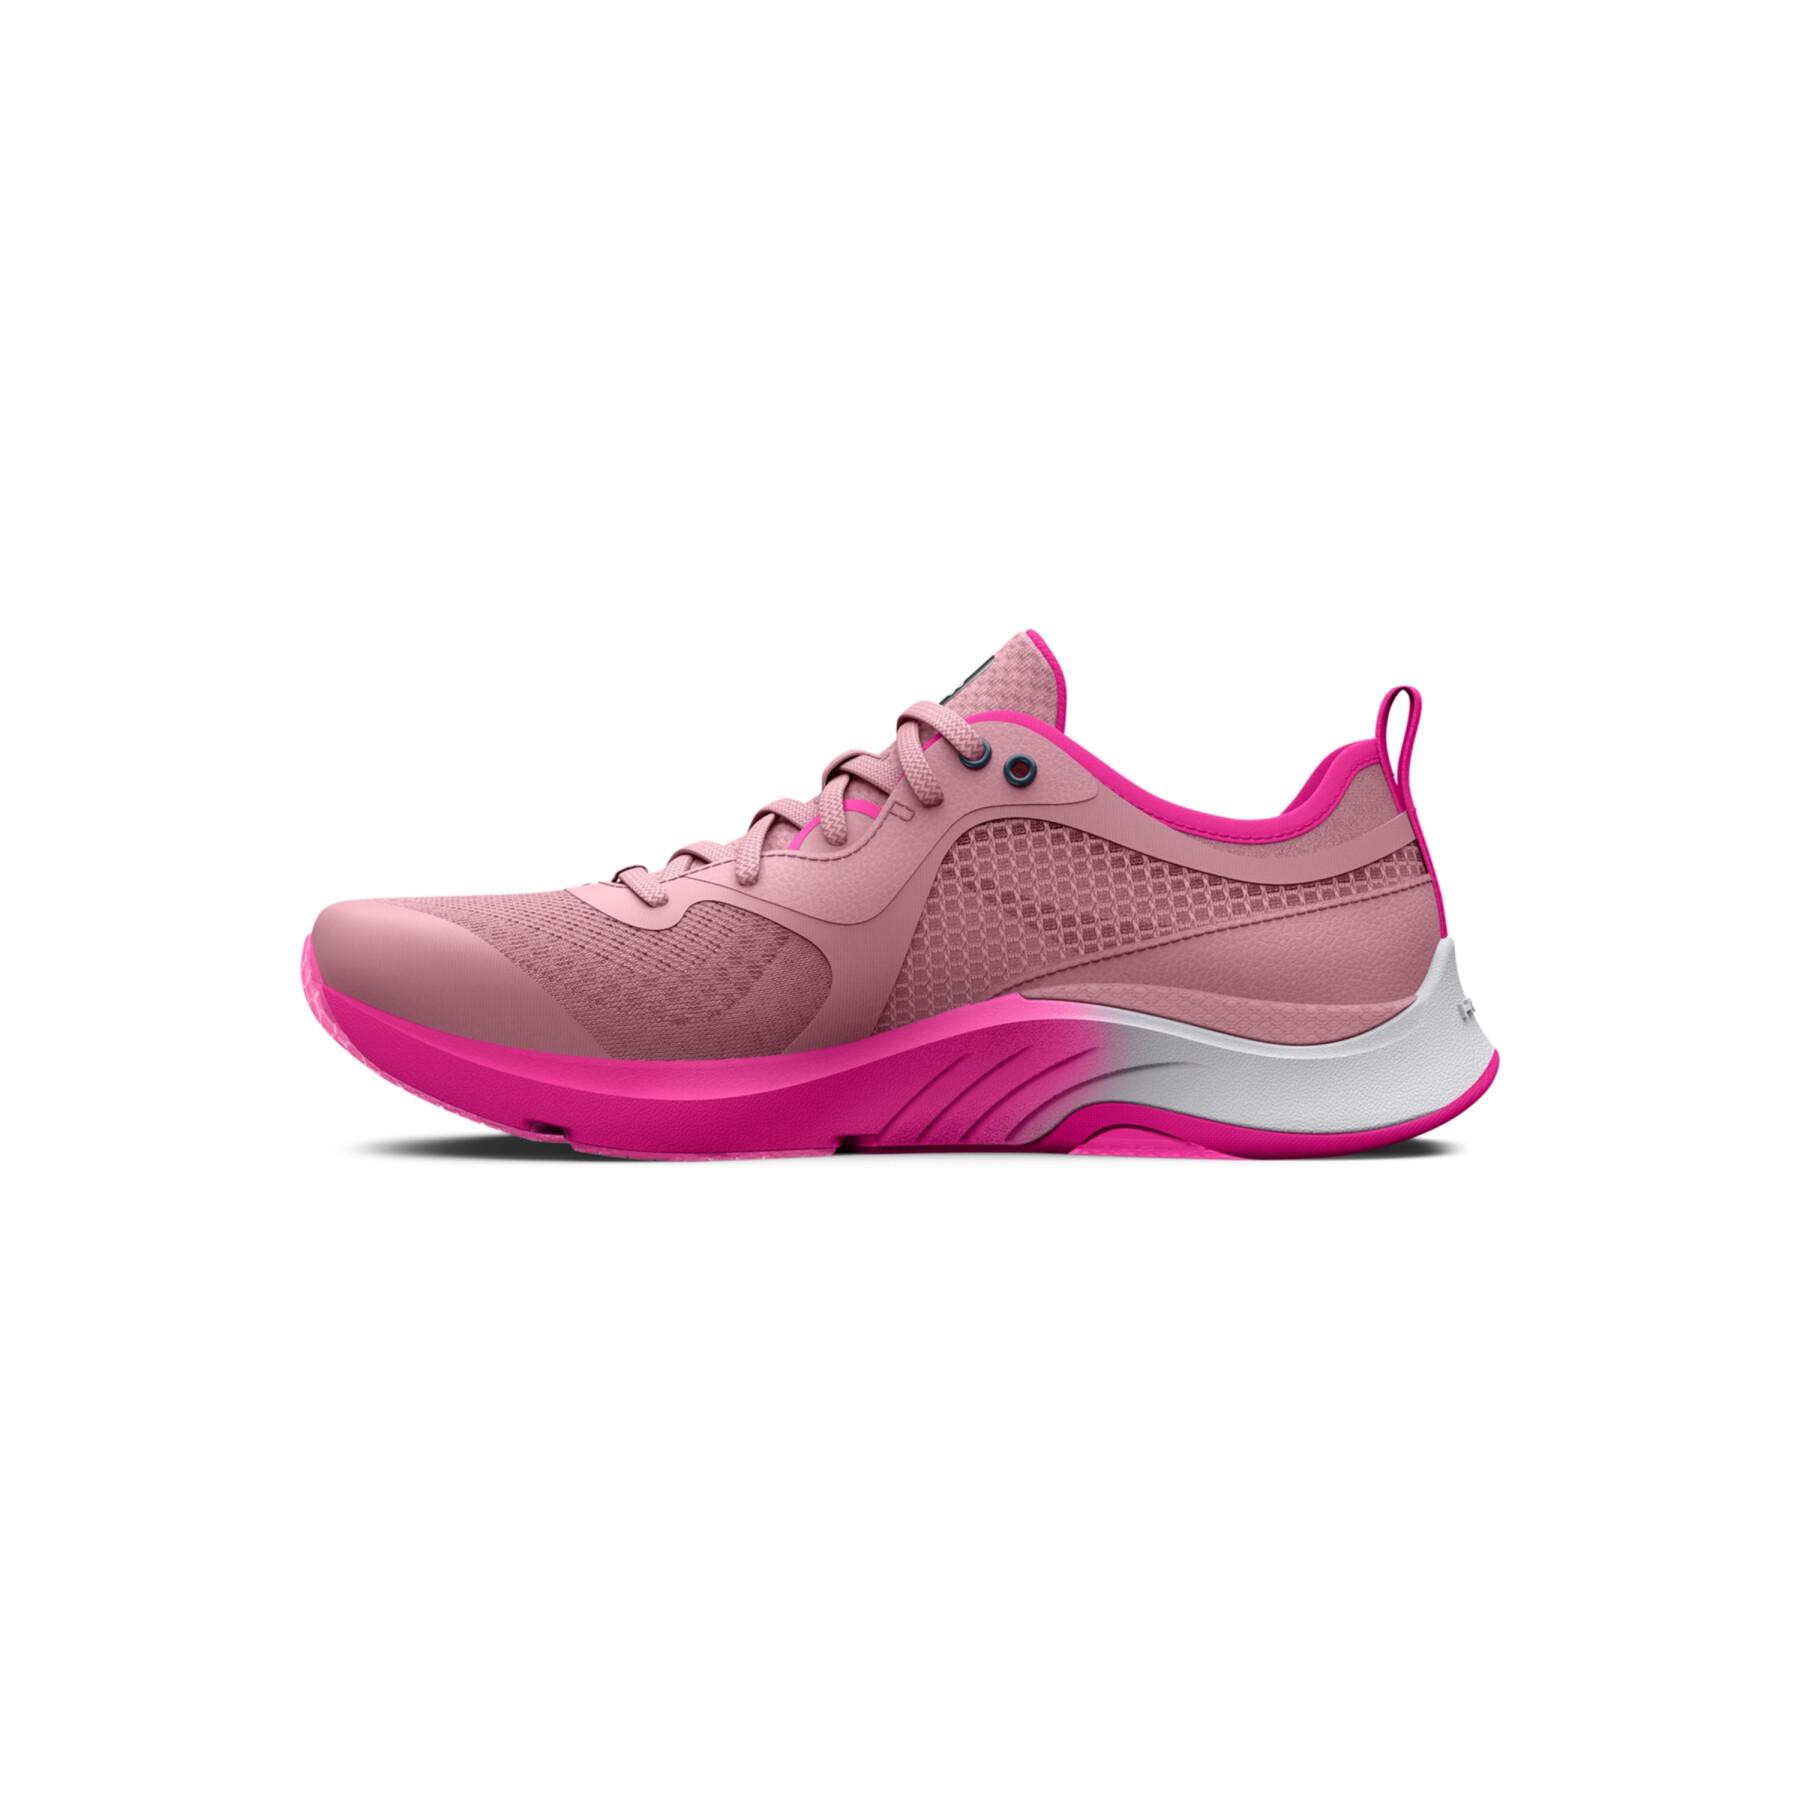 Zapatos de mujer running Under Armour HOVR Omnia Q1